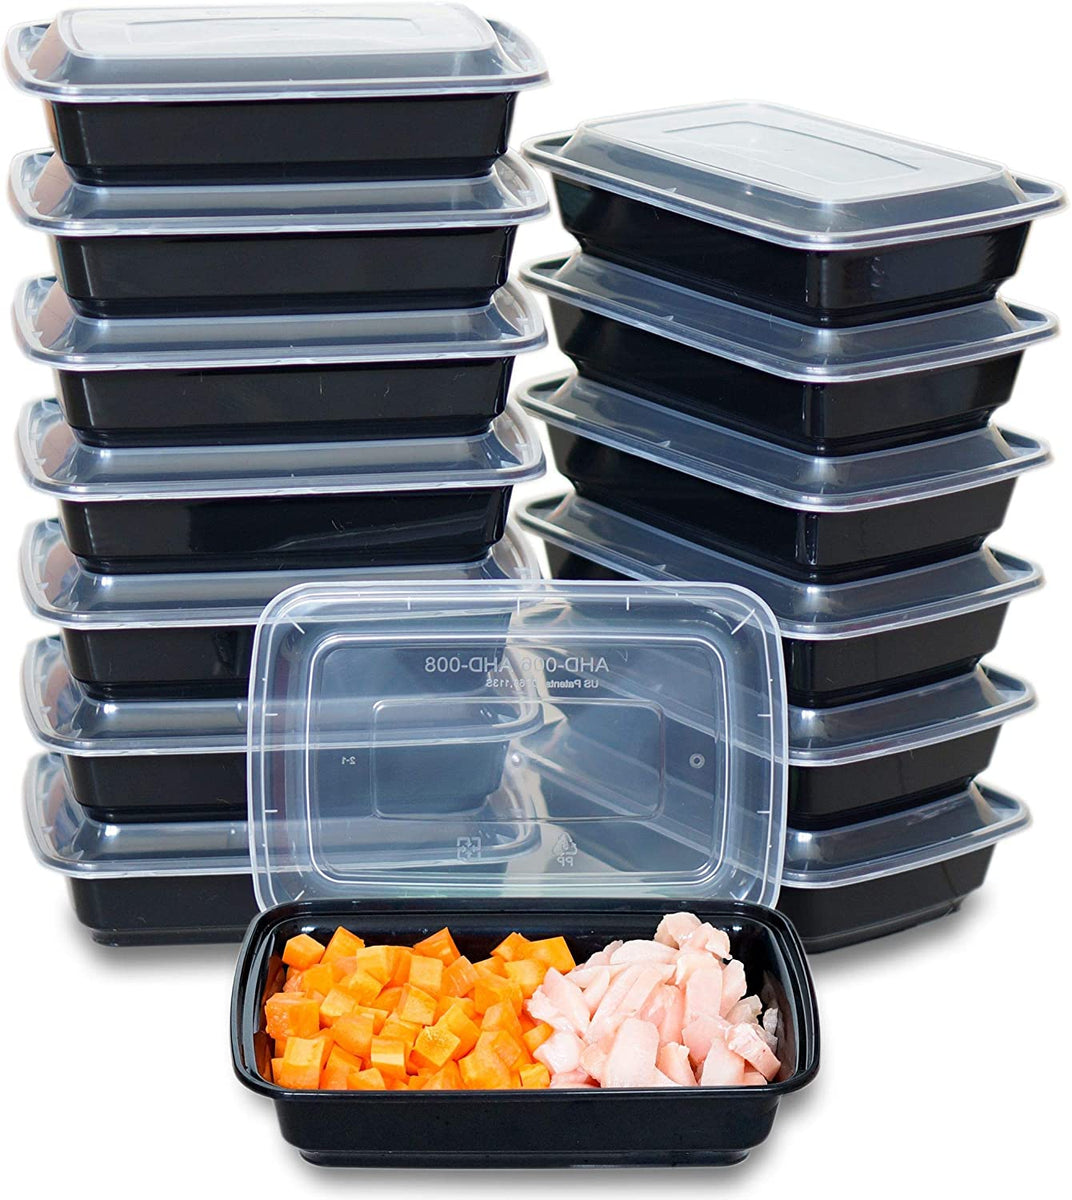 Rectangular Meal Prep Container With Handles